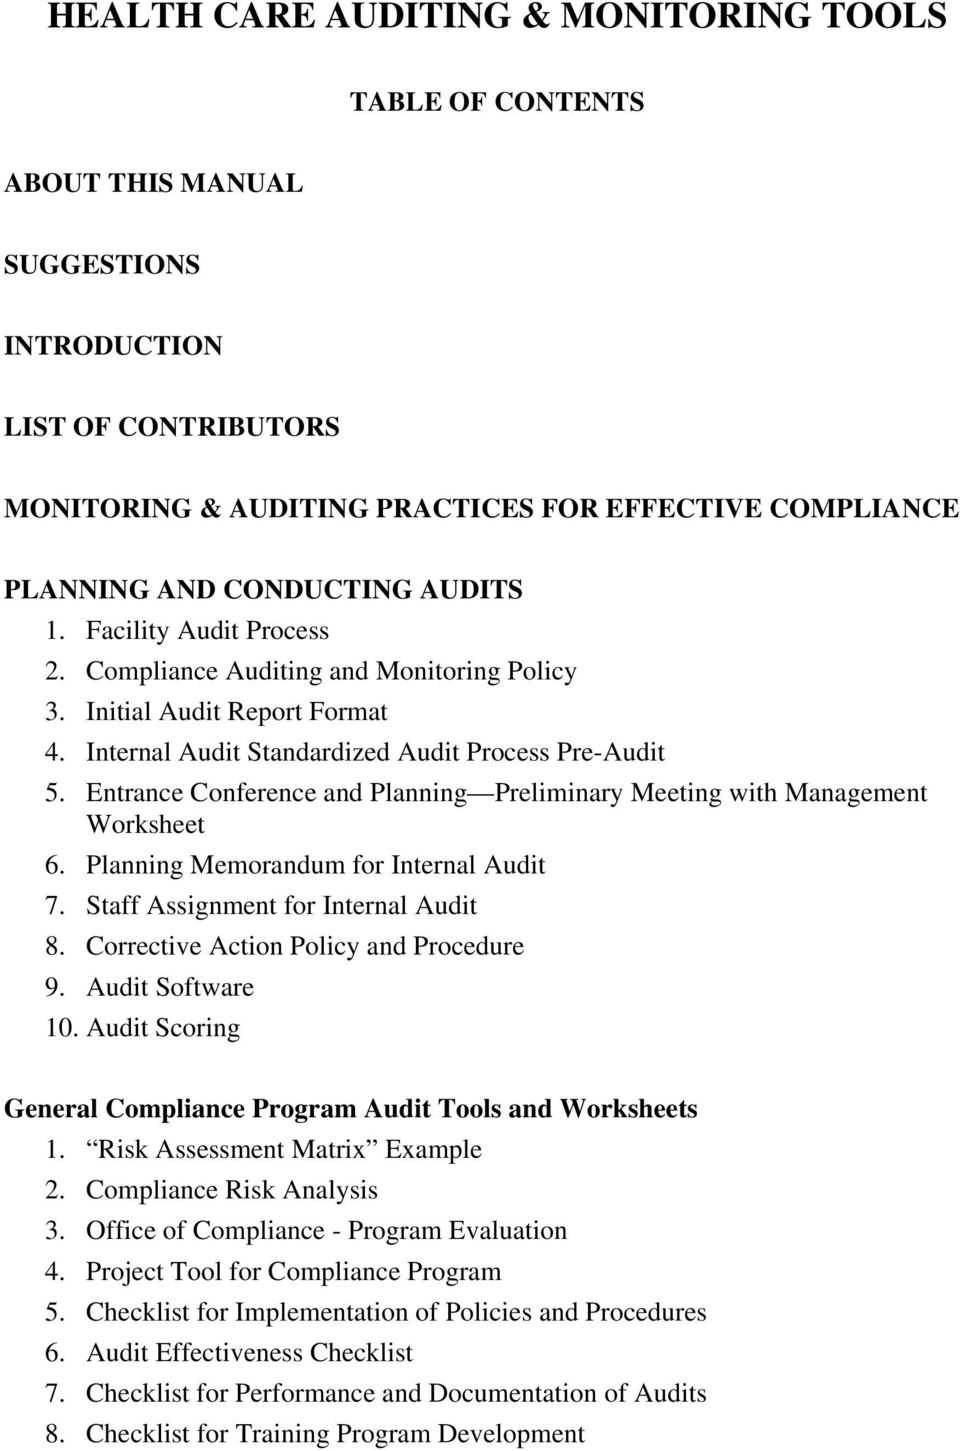 Health Care Auditing & Monitoring Tools – Pdf Free Download Regarding Compliance Monitoring Report Template